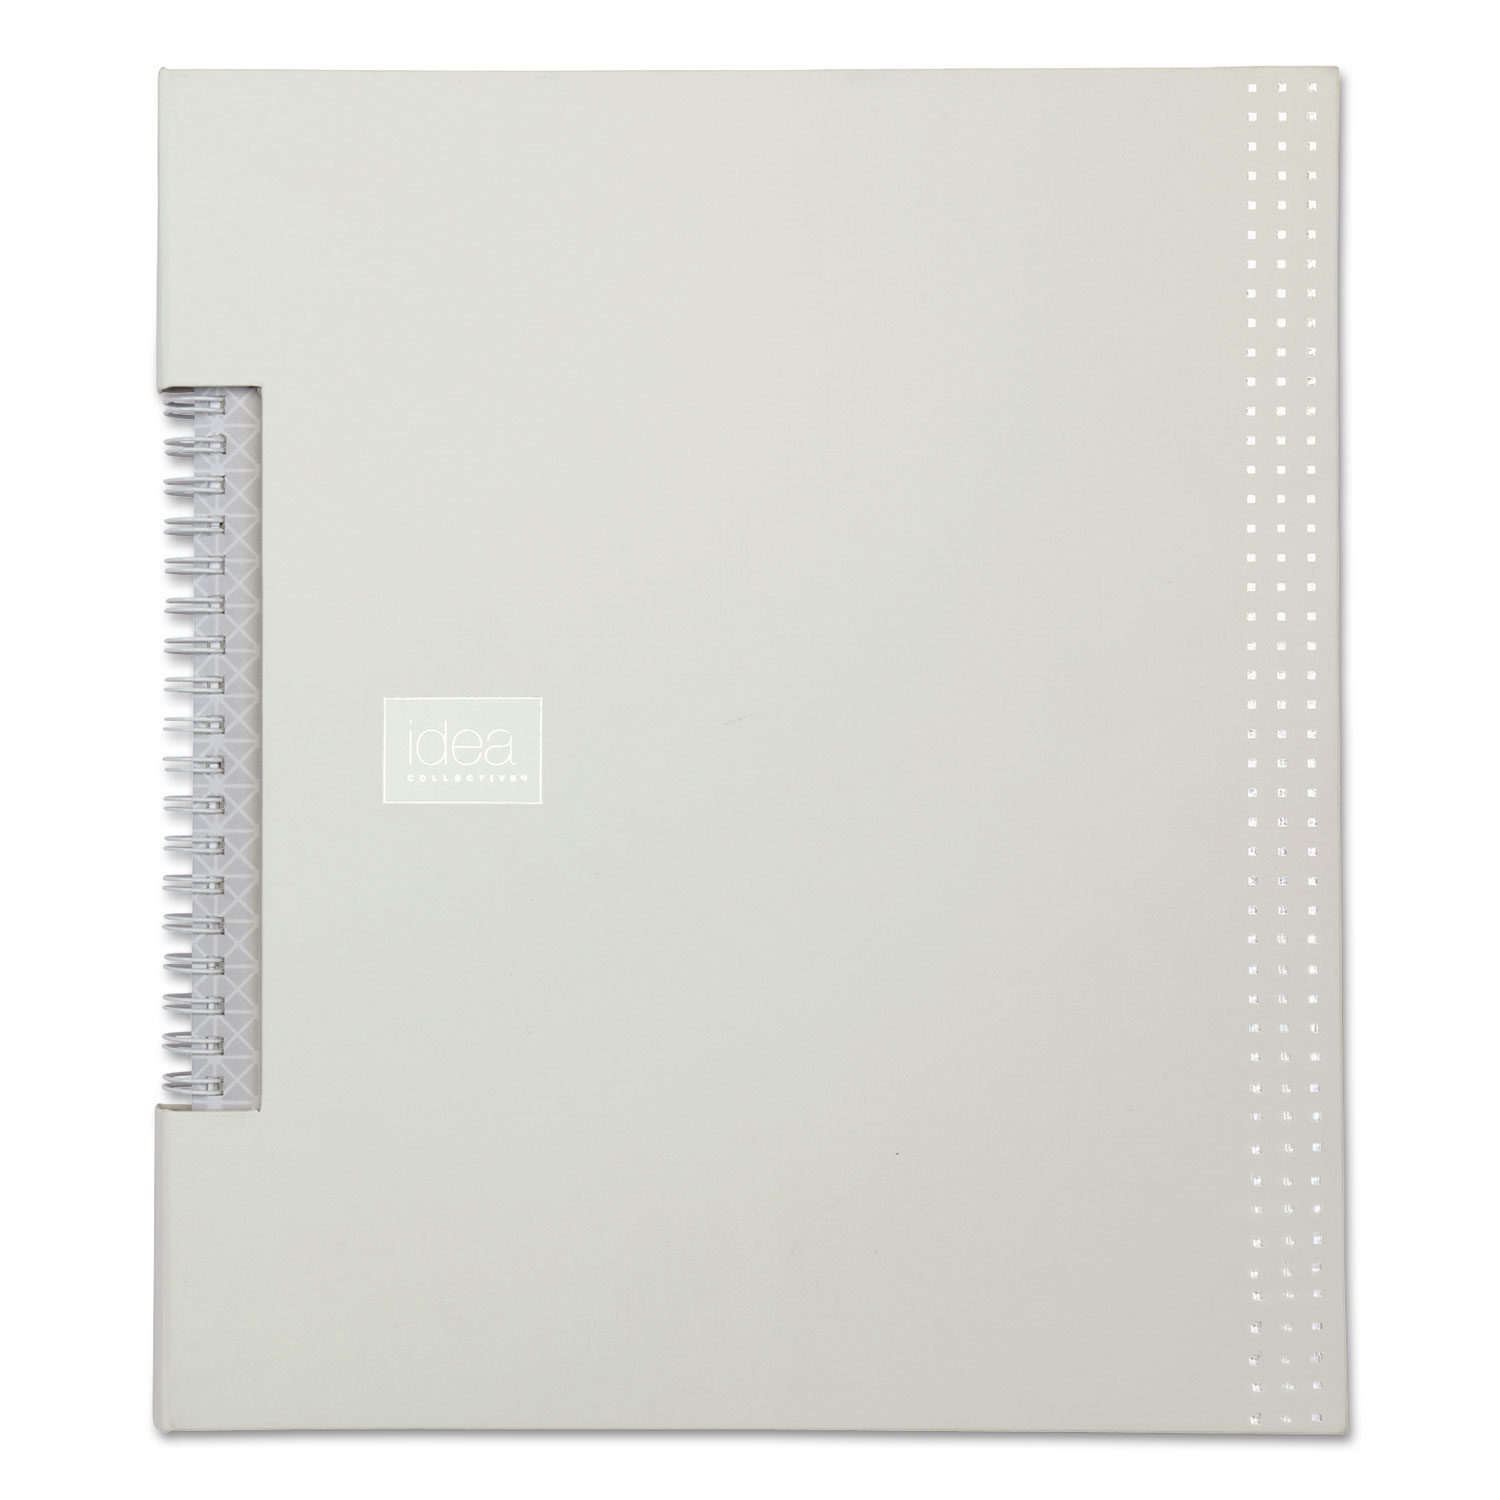  Oxford 56896 Idea Collective Professional Wirebound Notebook, White, 8 1/2 x 11, 80 Pages (TOP56896) 